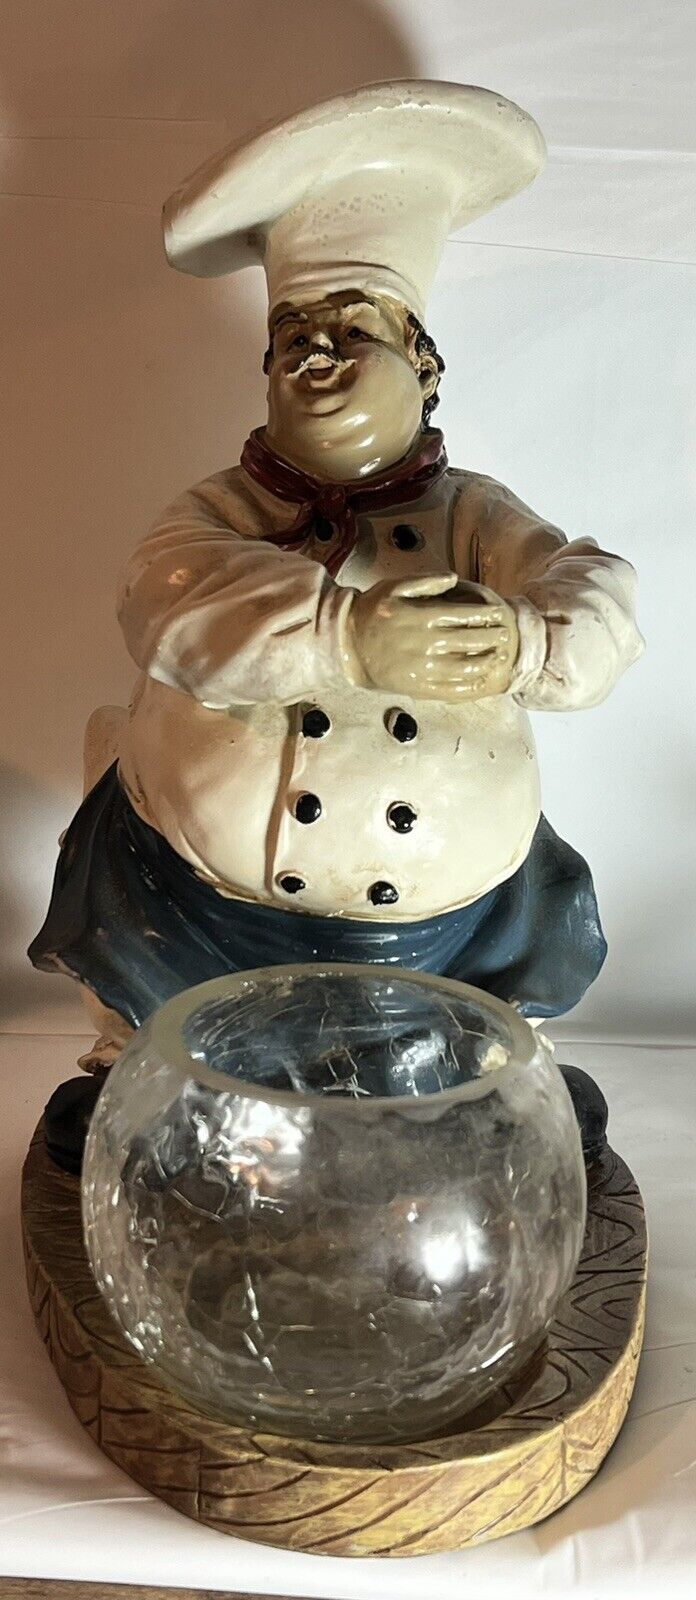 Vintage Chef Figure. Candle Holder. Chubby Chef. Kitchen Decor